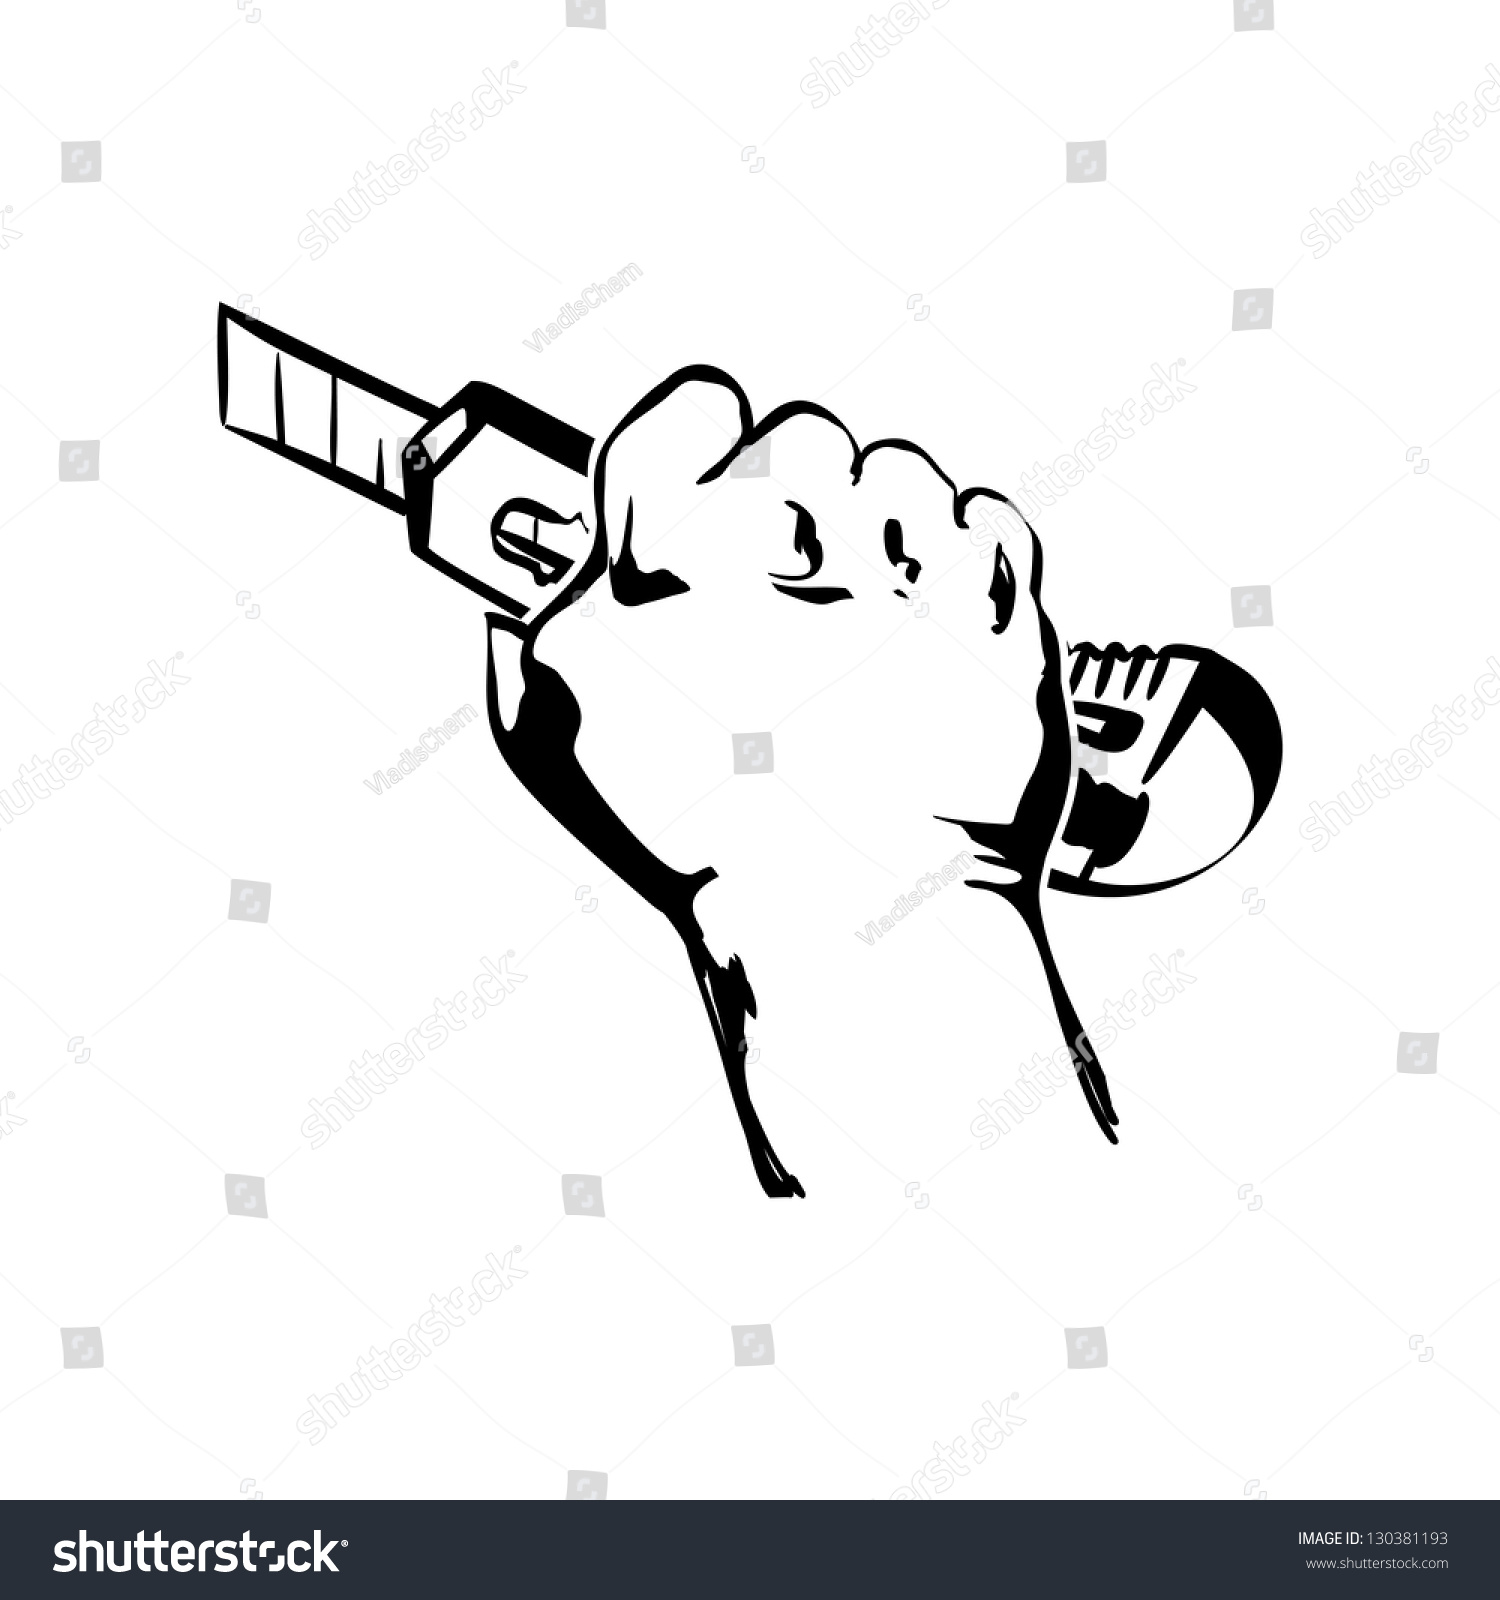 Hand Holding Construction Knife Vector Black Stock Vector (Royalty Free